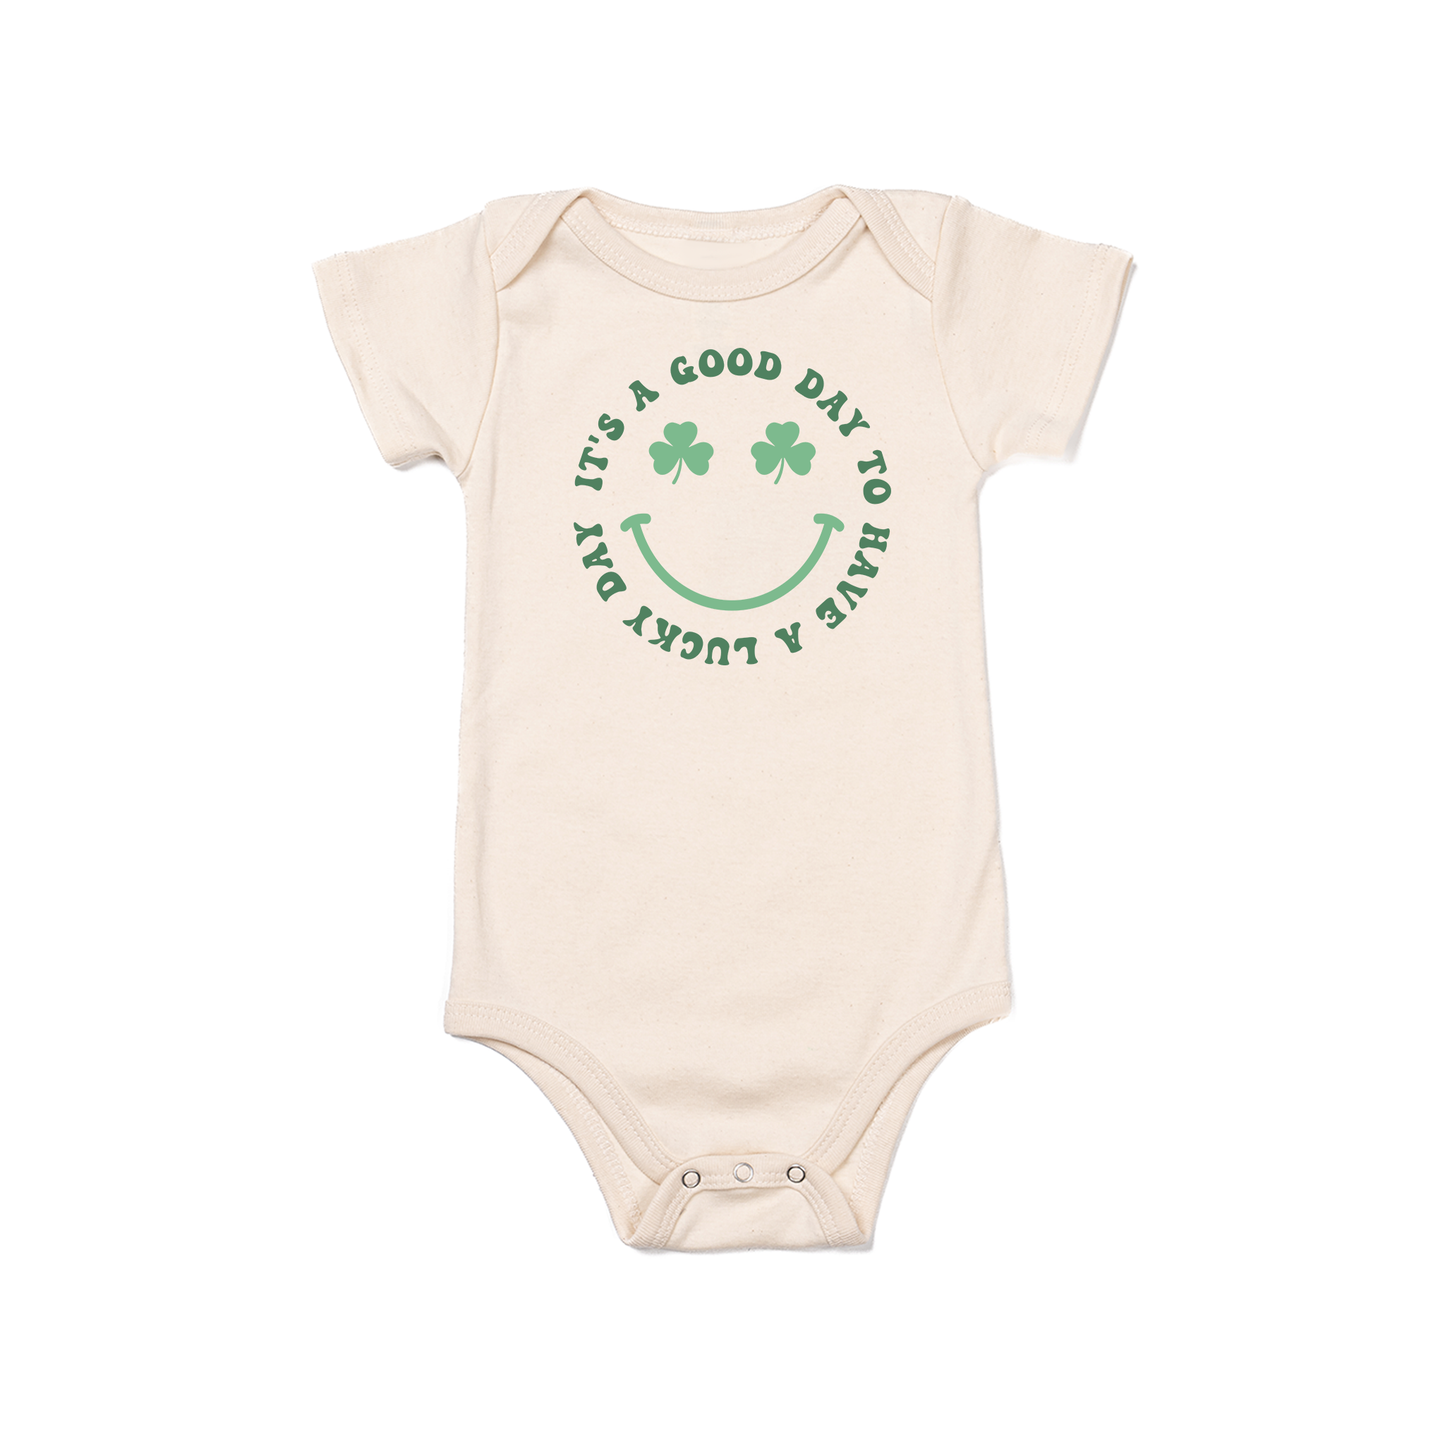 It's a good day to have a Lucky day (St. Patrick's) - Bodysuit (Natural, Short Sleeve)